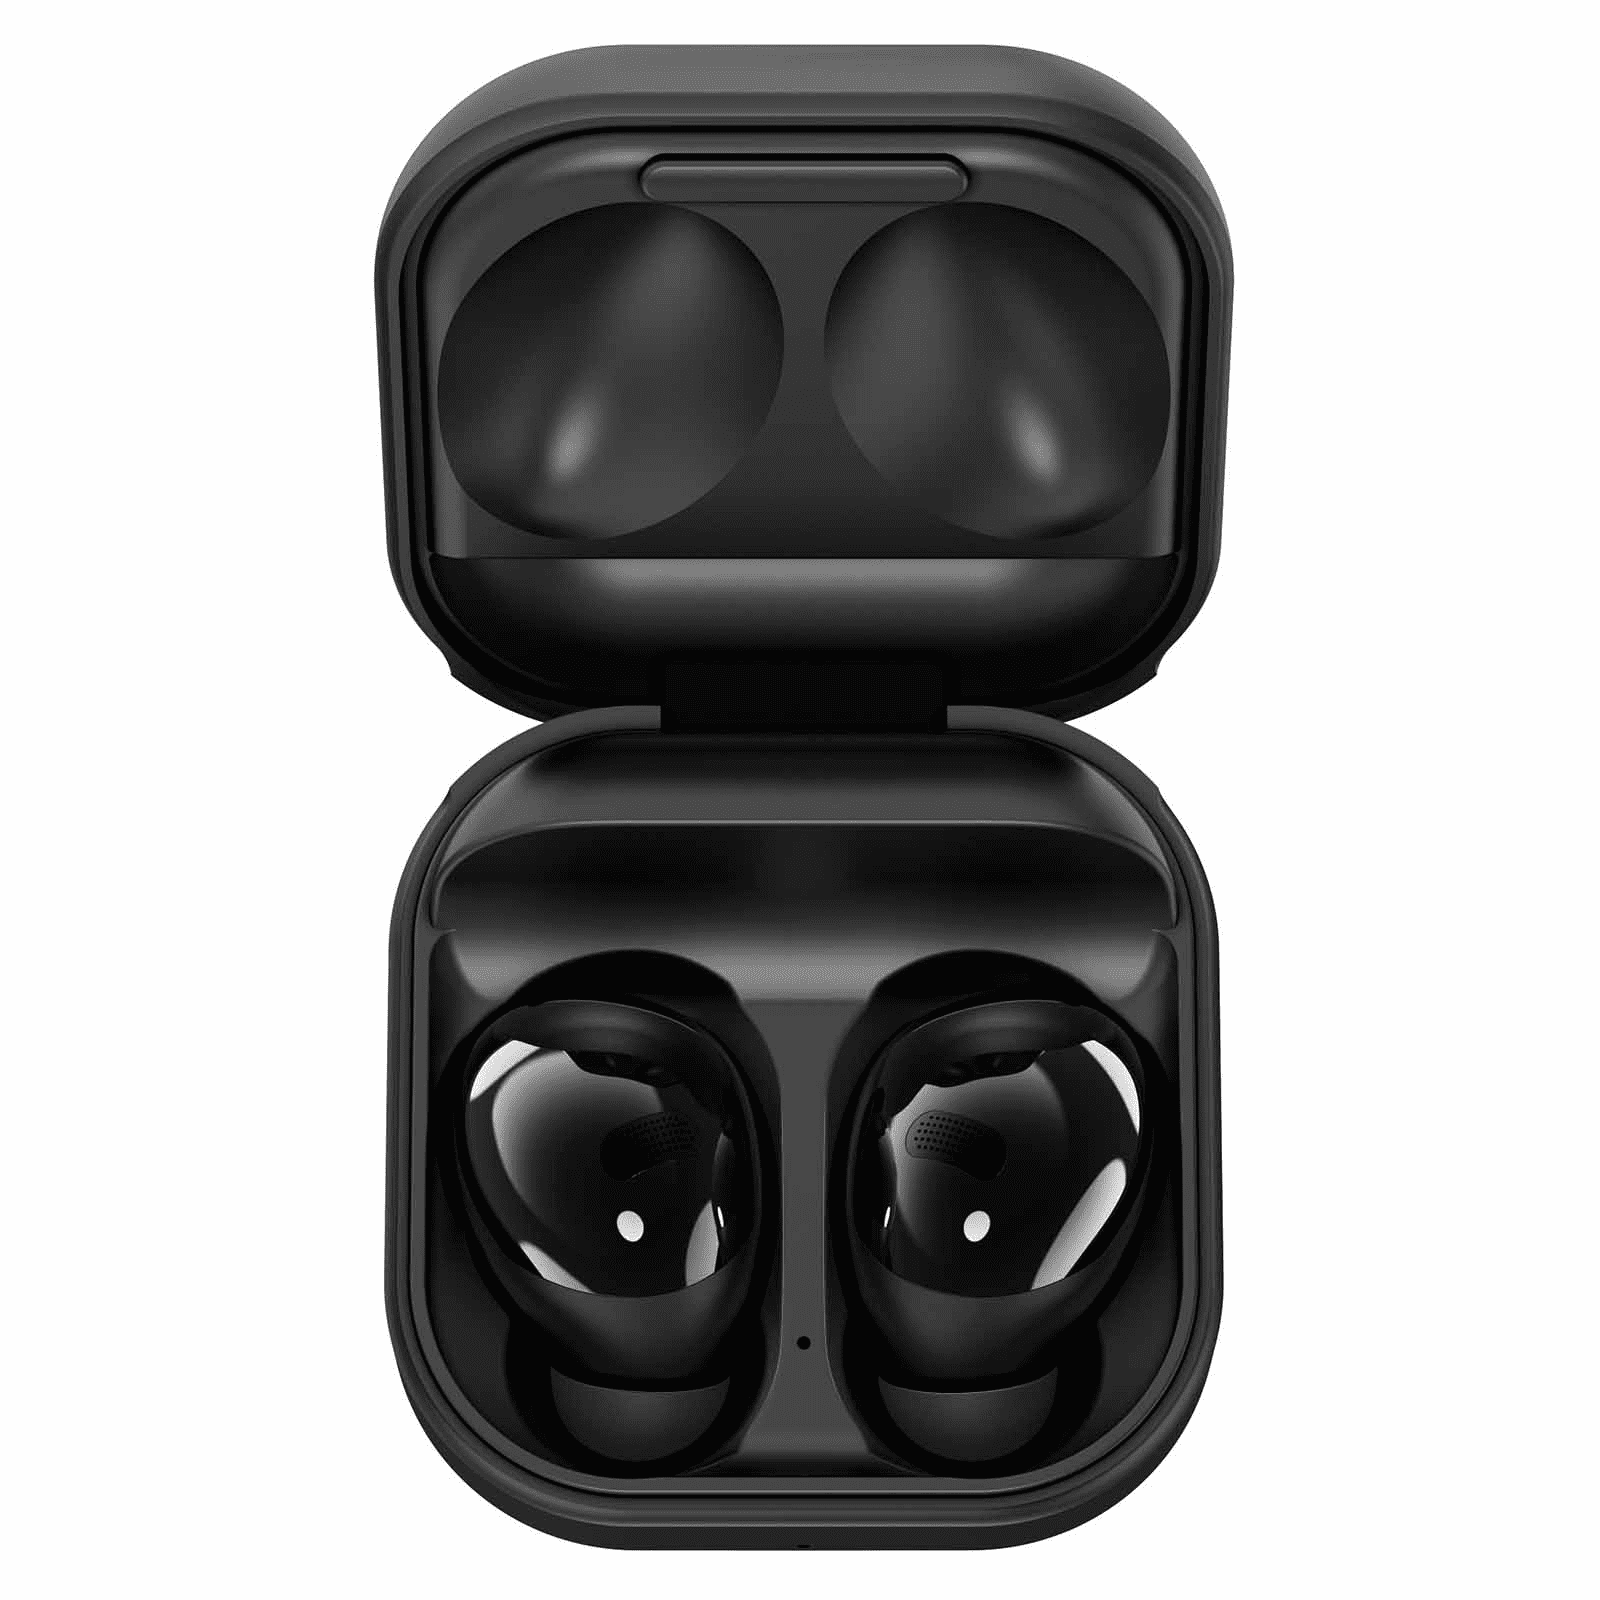 Urbanx Street Buds Pro True Bluetooth Wireless Earbuds For Xiaomi Redmi Note 9 Pro India With Active Noise Cancelling Wireless Charging Case Included Black Walmart Com Walmart Com